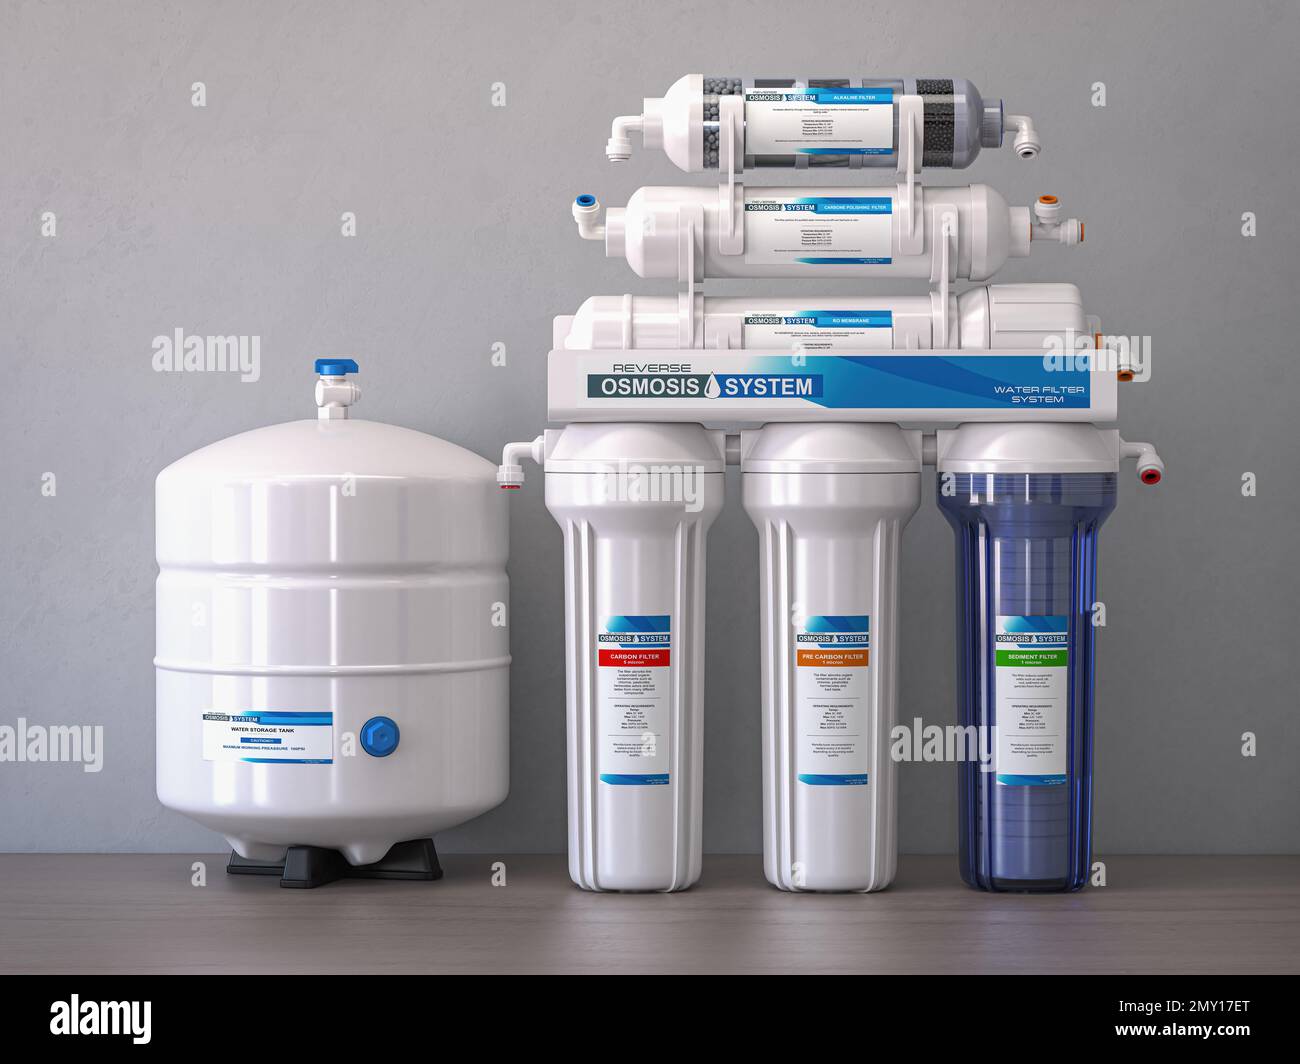 Reverse osmosis water purification system isolaterd on a kitchen table. Water cleaning system. 3d illustration Stock Photo